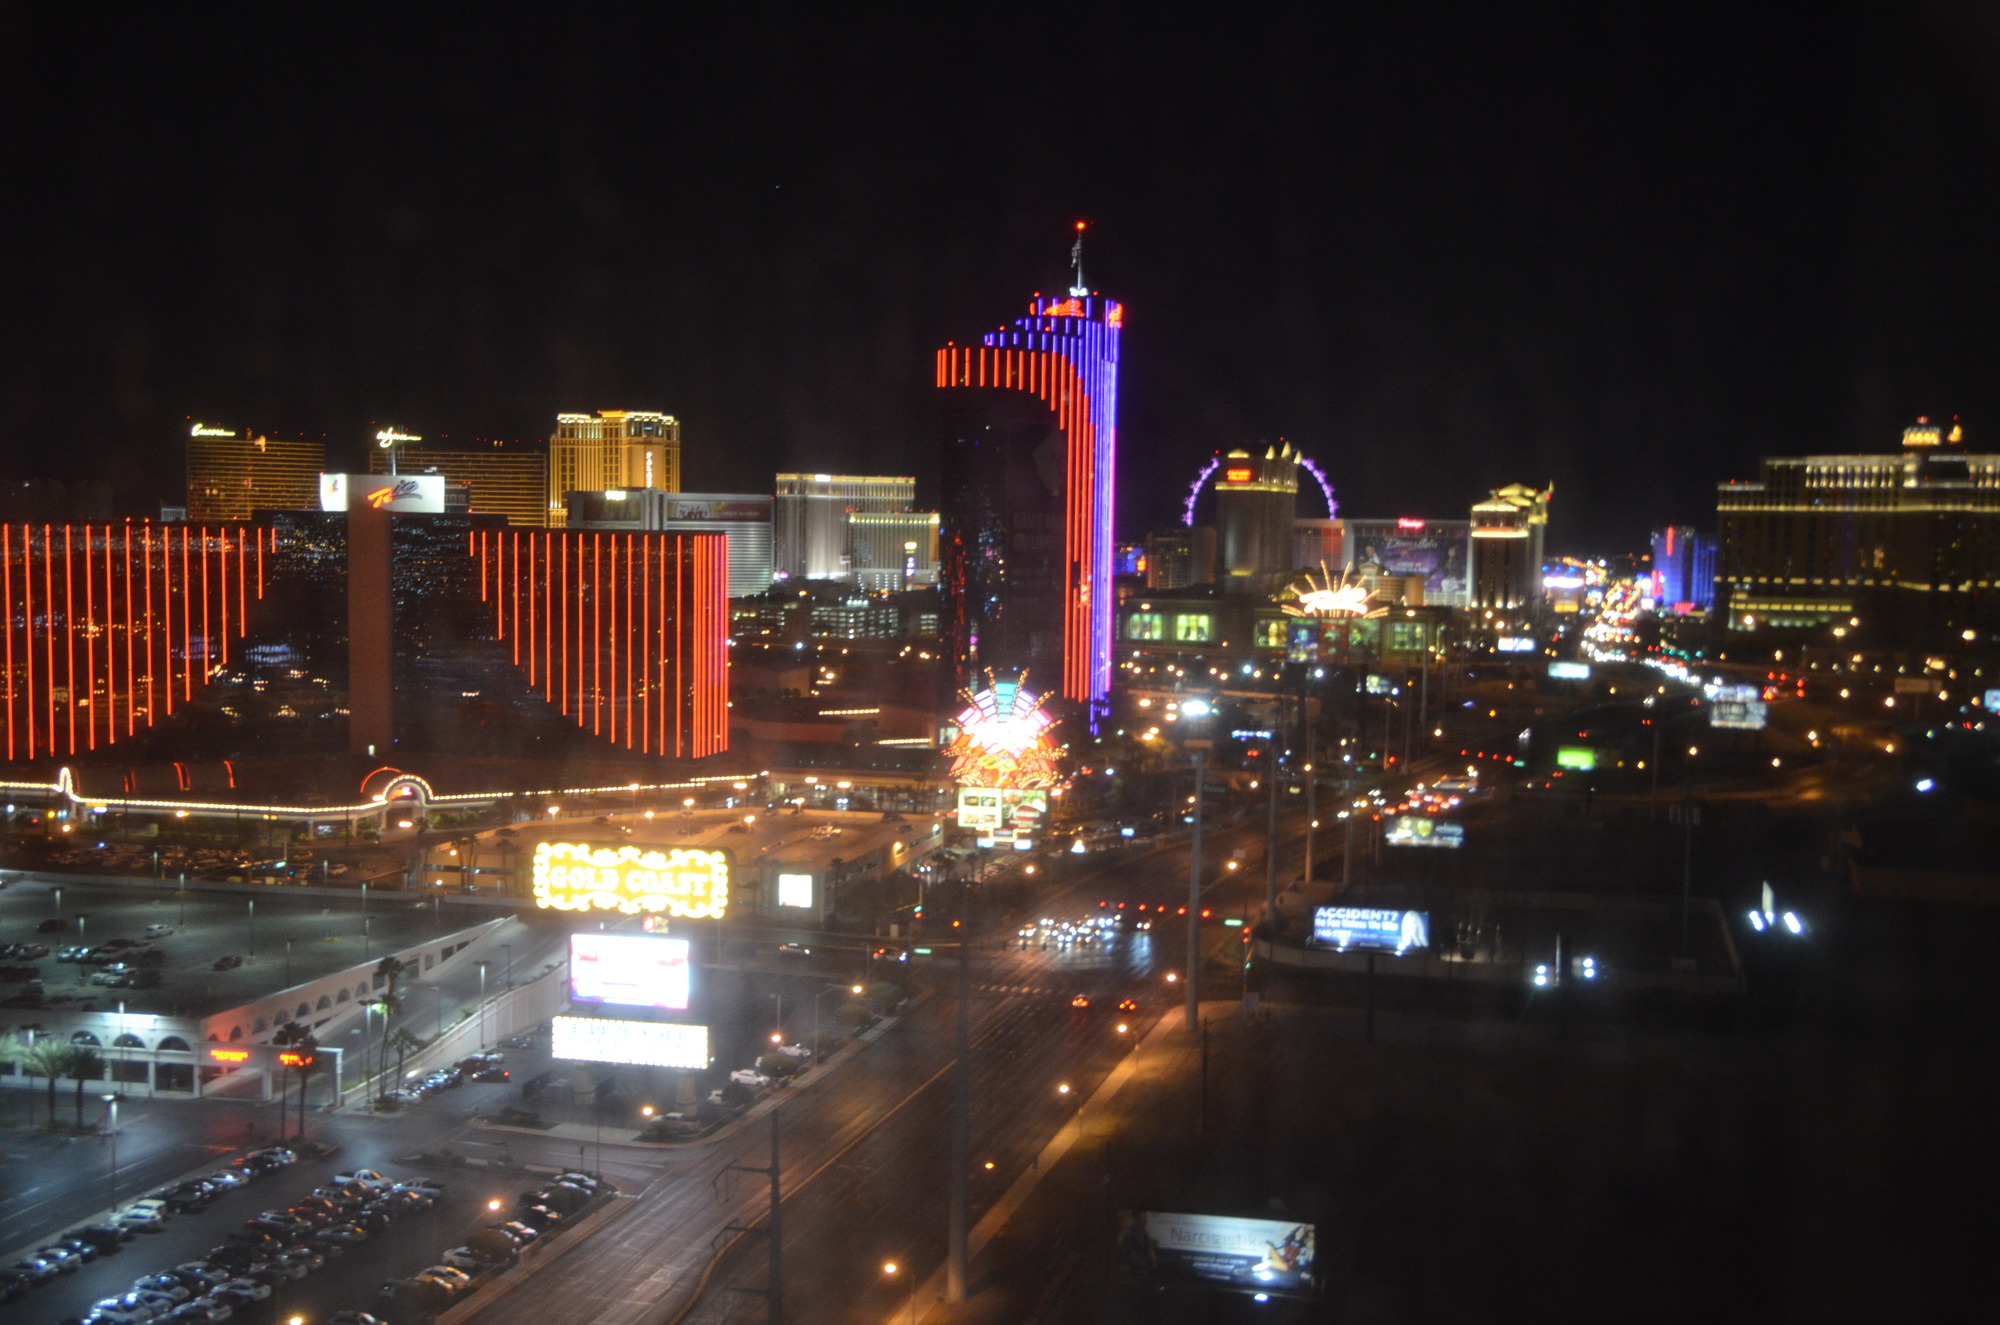 view of the Las Vegas strip at night from The Palms